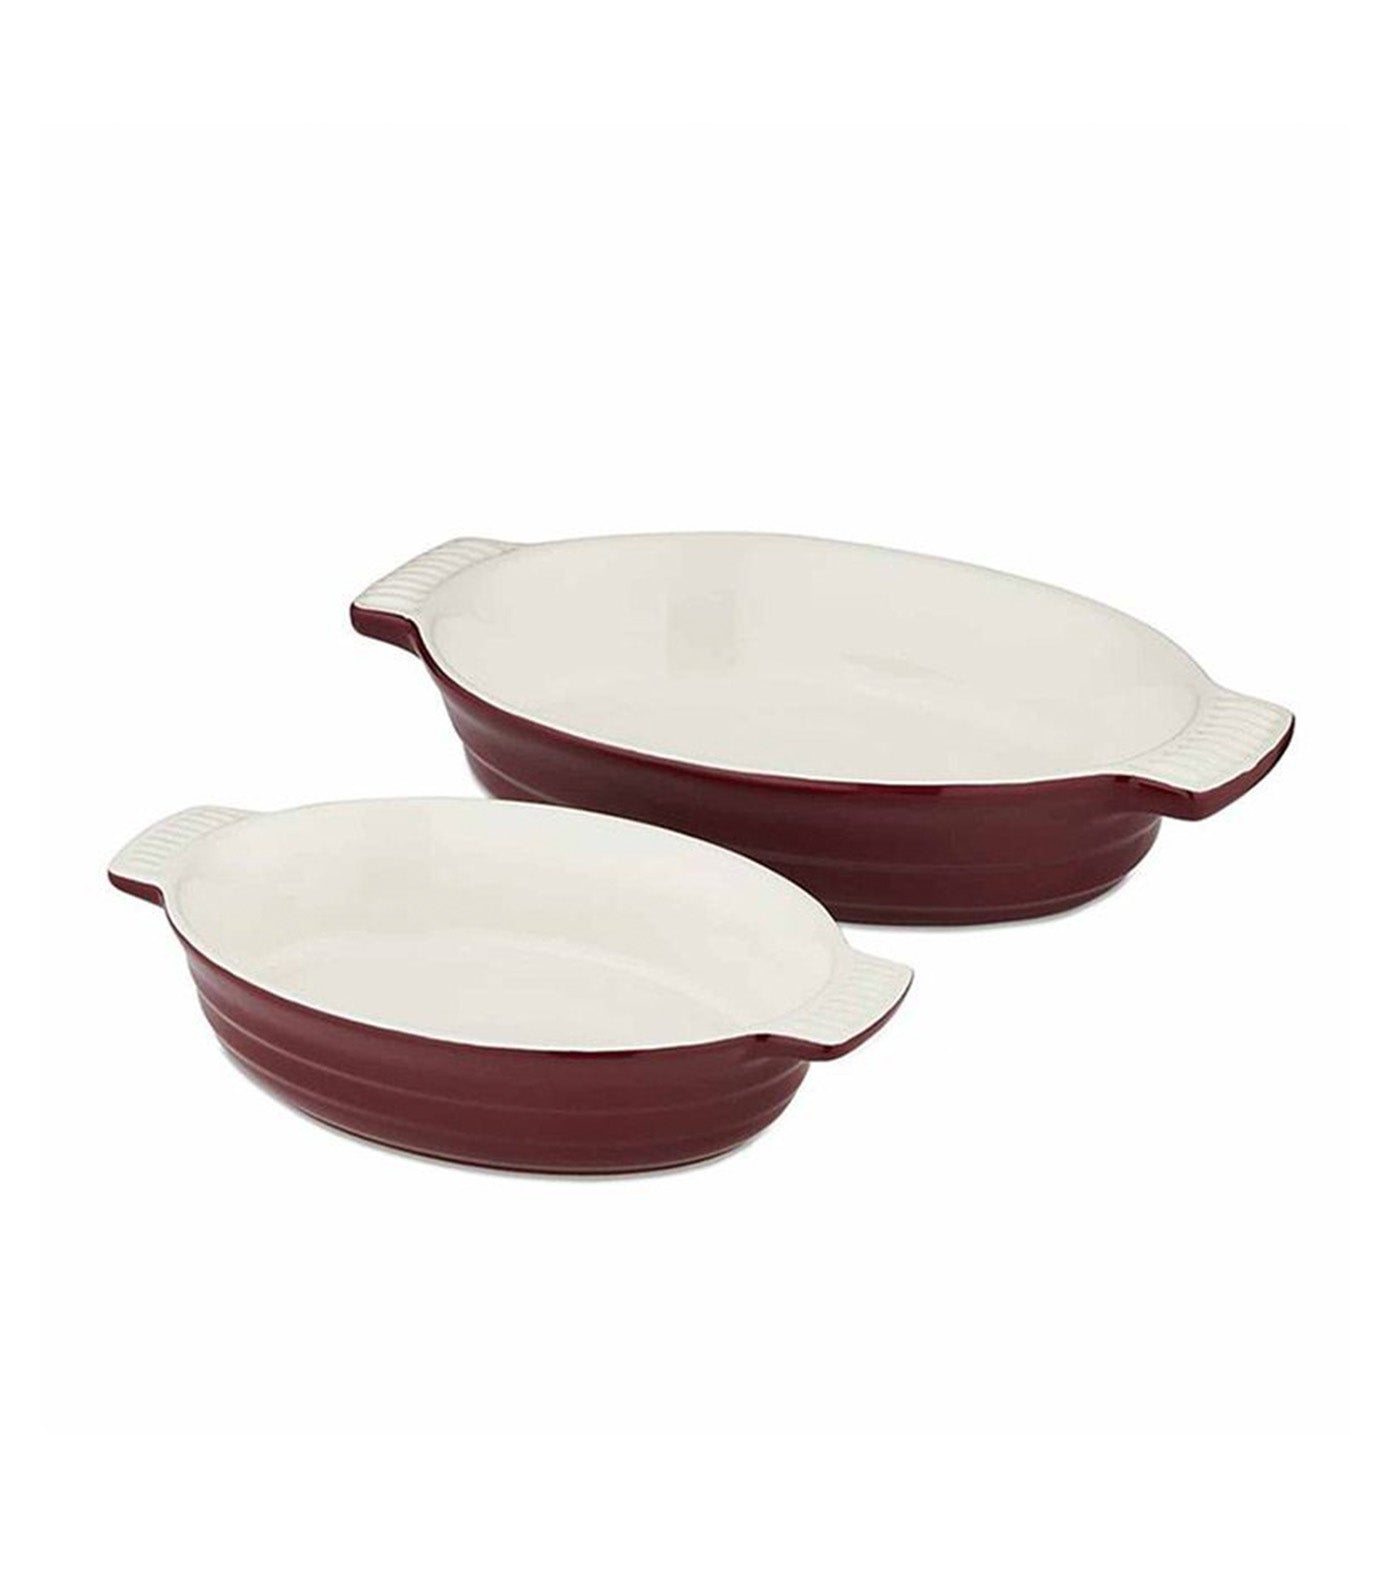 Set of Two Oval Oven Dishes